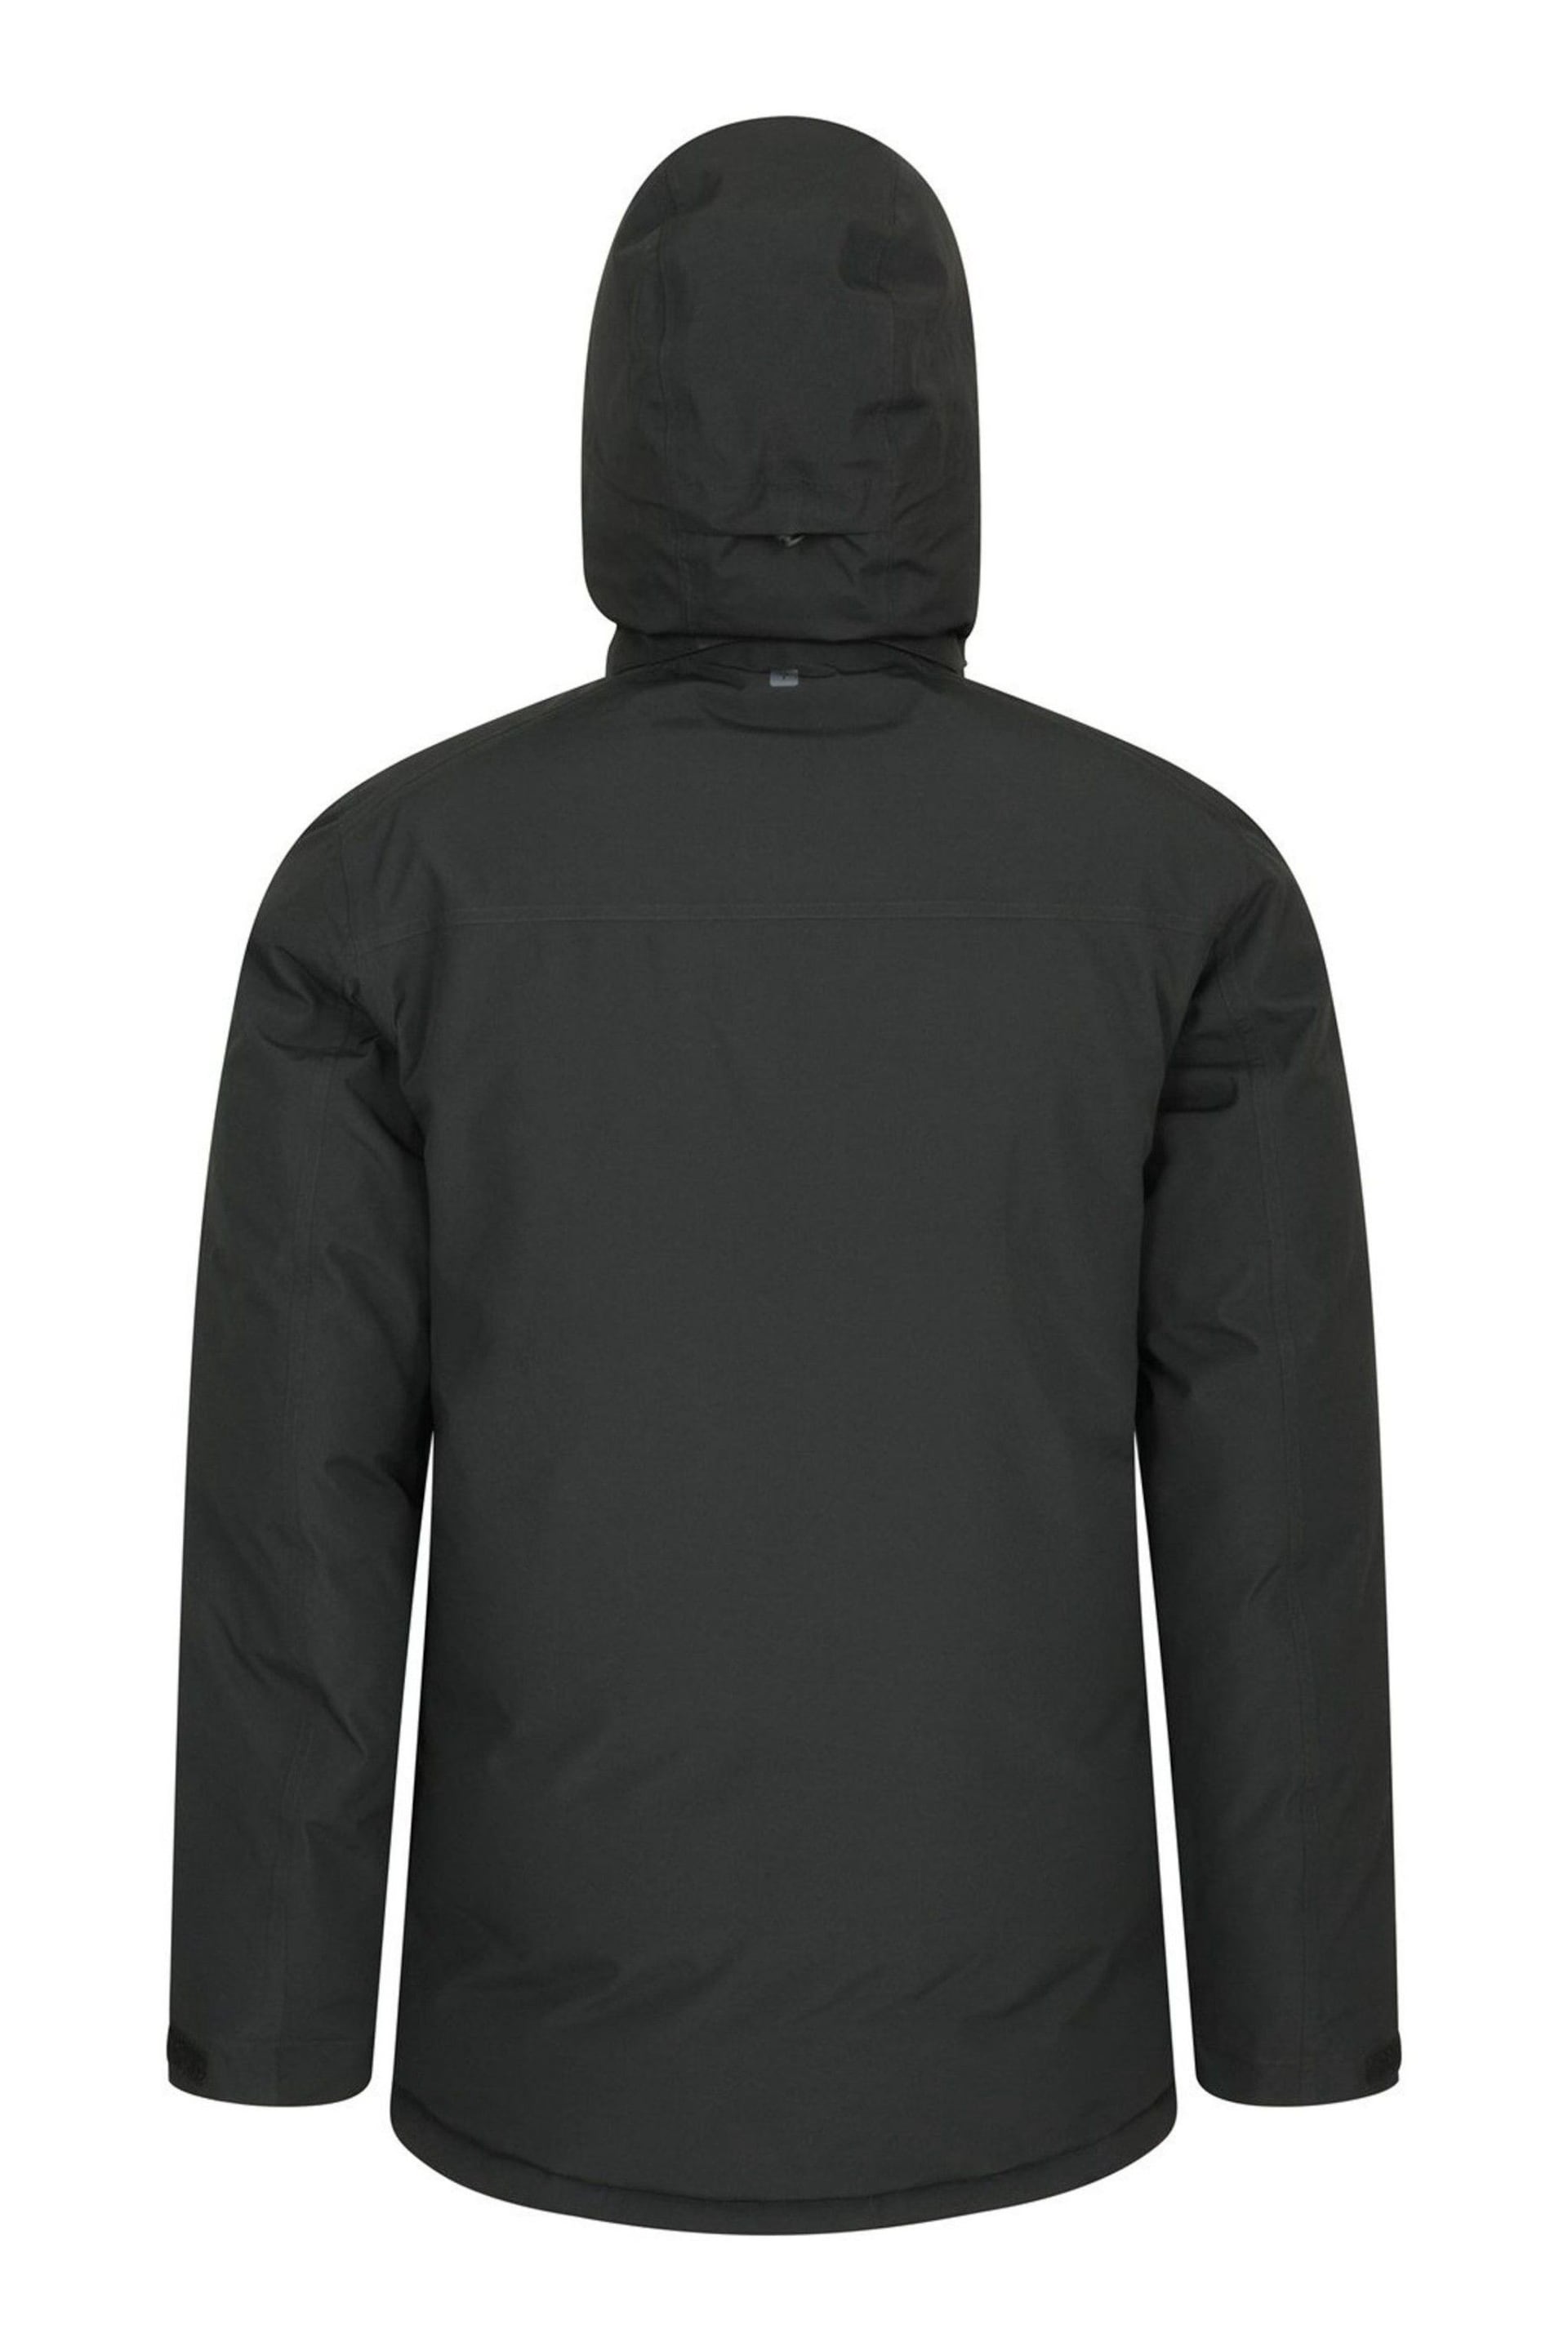 Mountain Warehouse Black Concord Waterproof Extreme Mens Down Long Jacket - Image 3 of 5